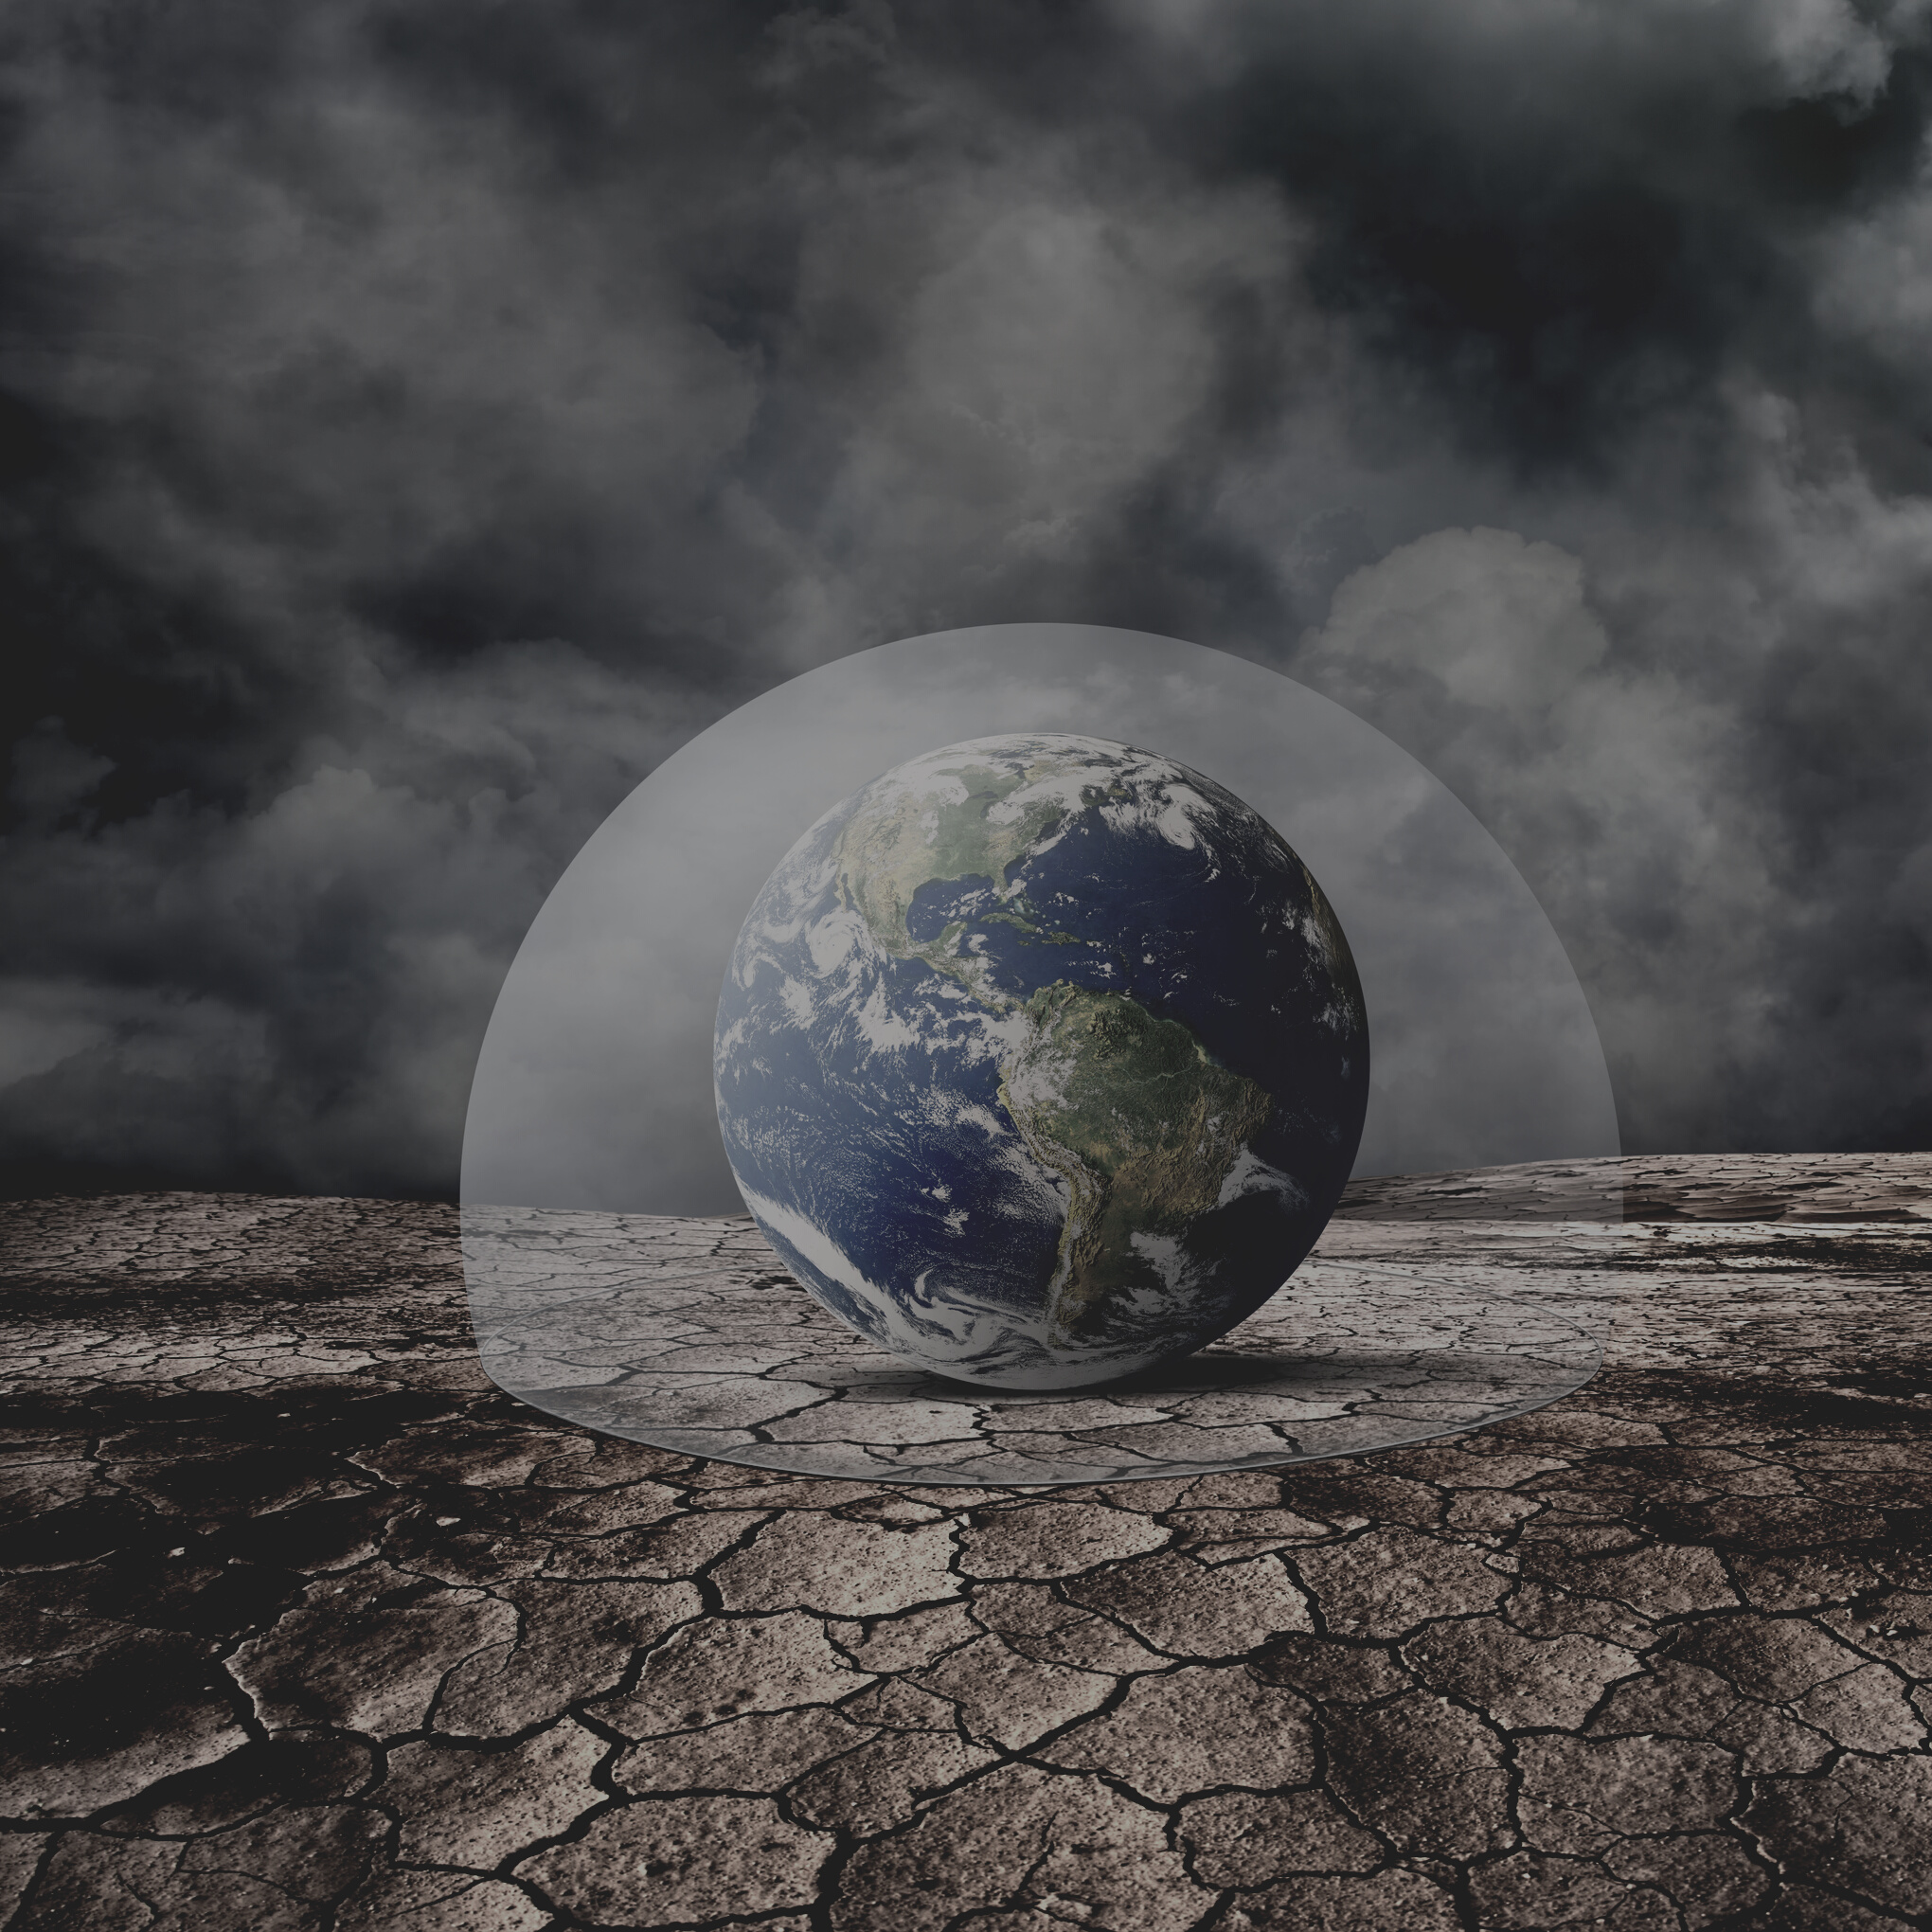 Conceptual climate change image of rescuing the world